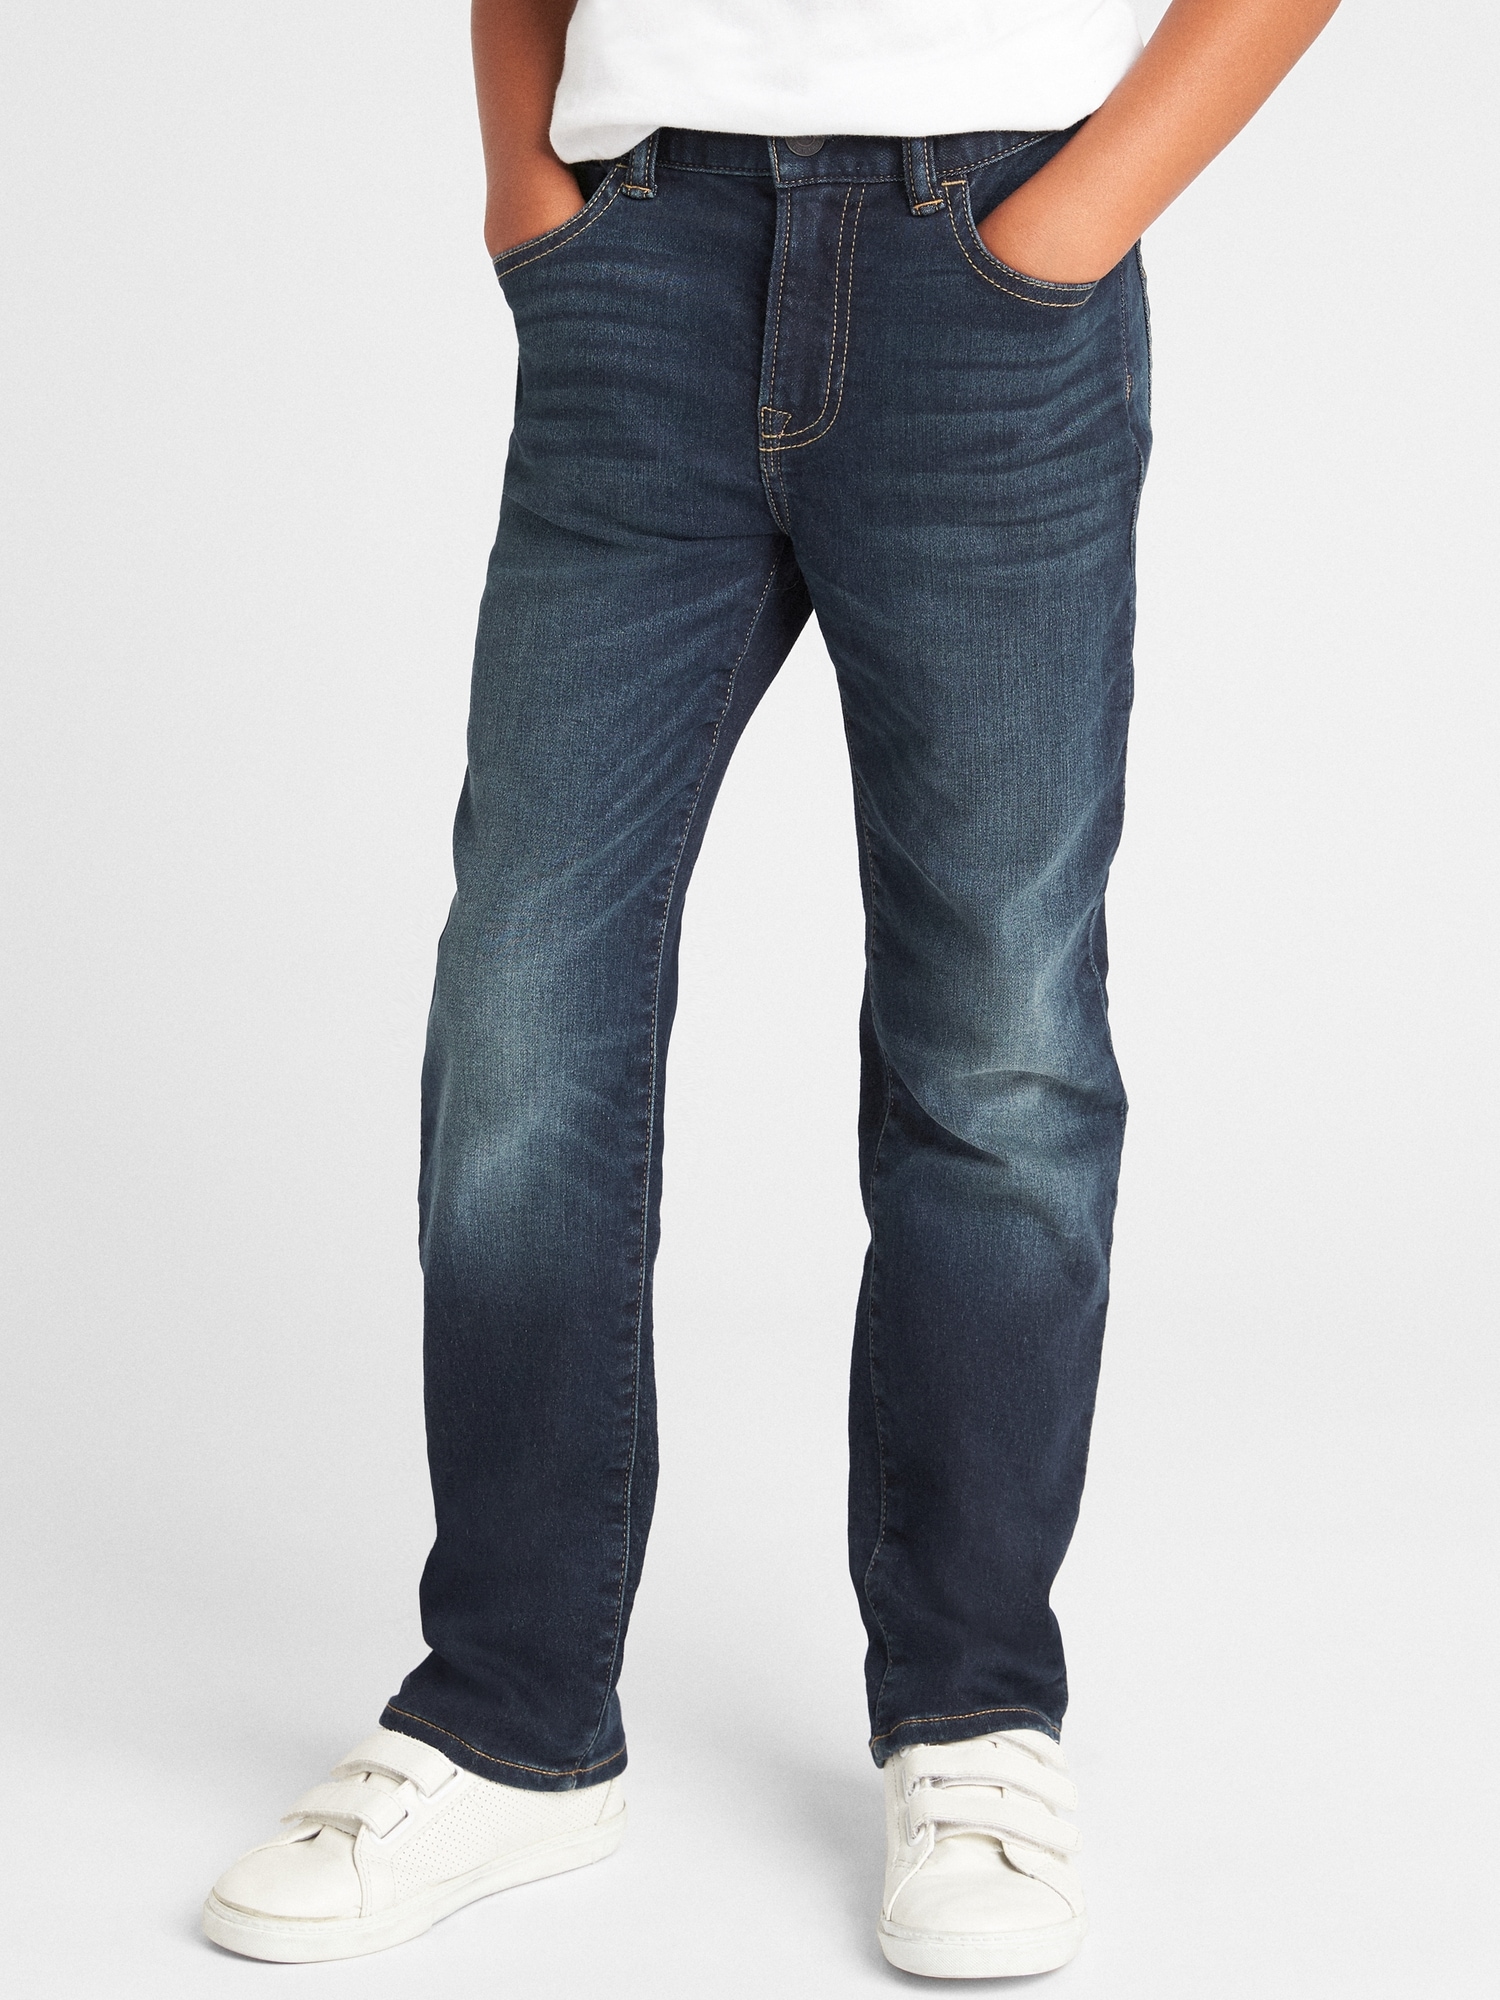 Kids Original Jeans with Washwell™ | Gap